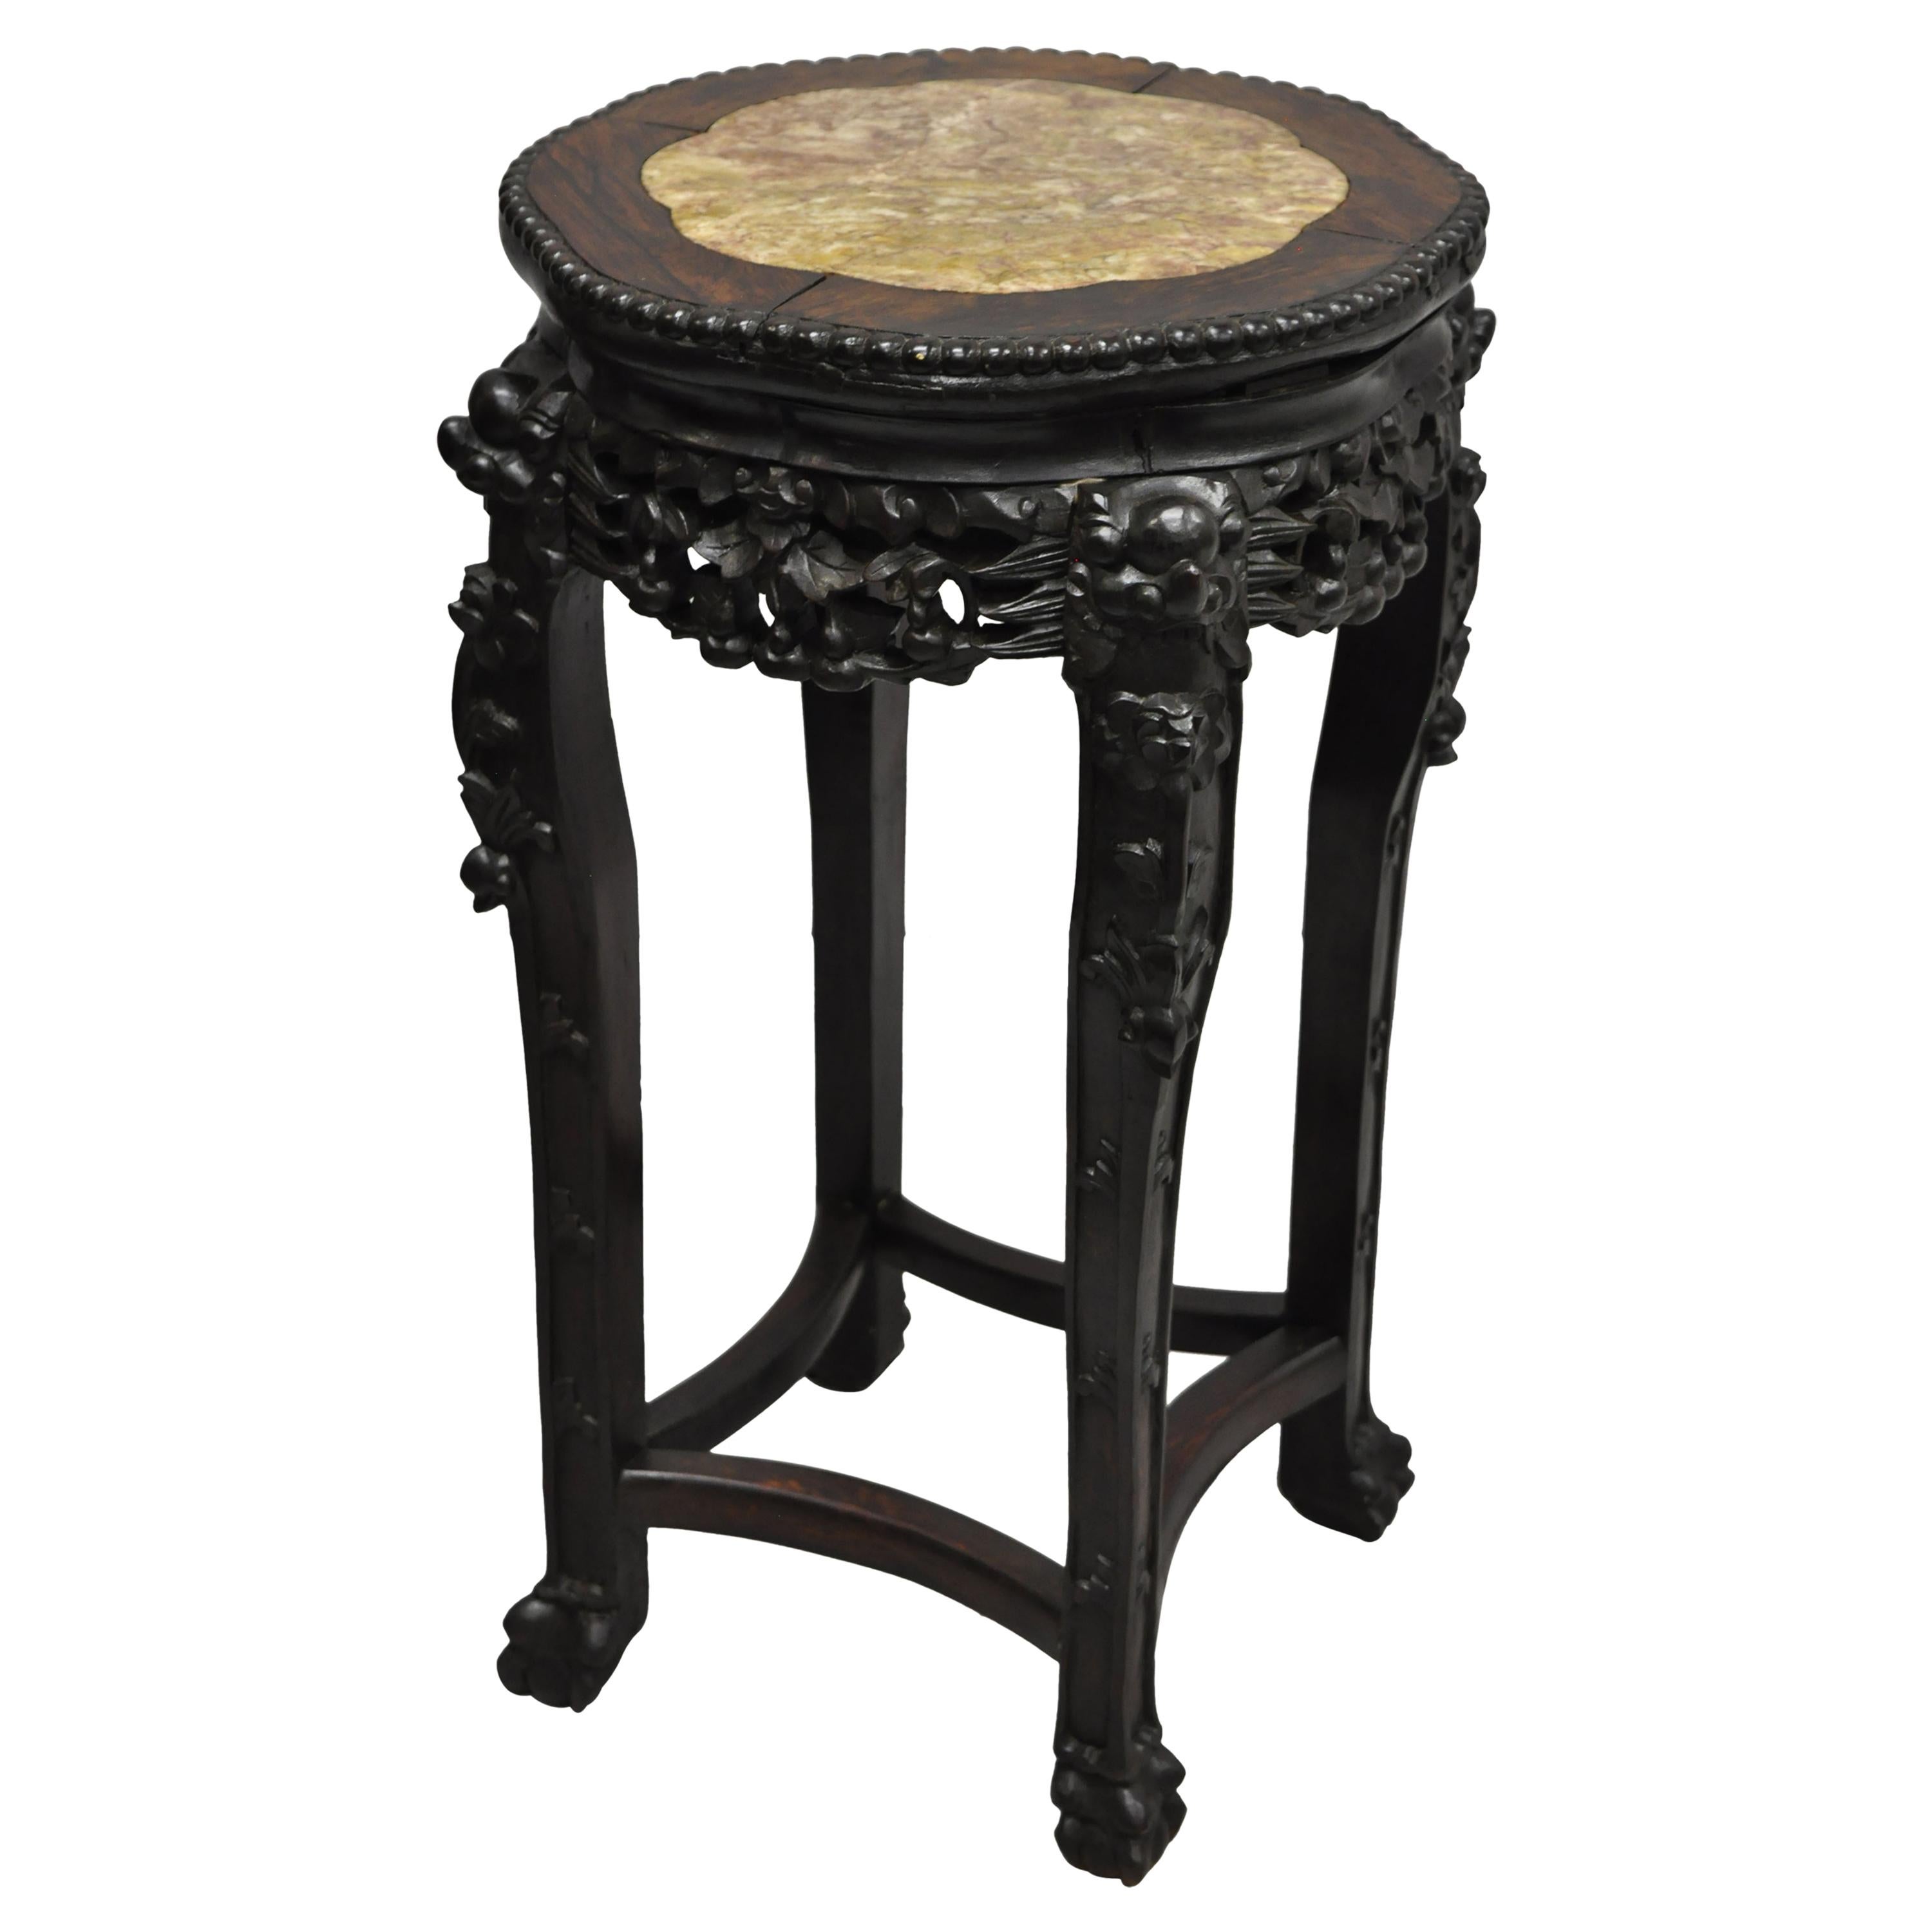 Antique Carved Hardwood Rosewood Marble-Top Chinese Pedestal Table Plant Stand C